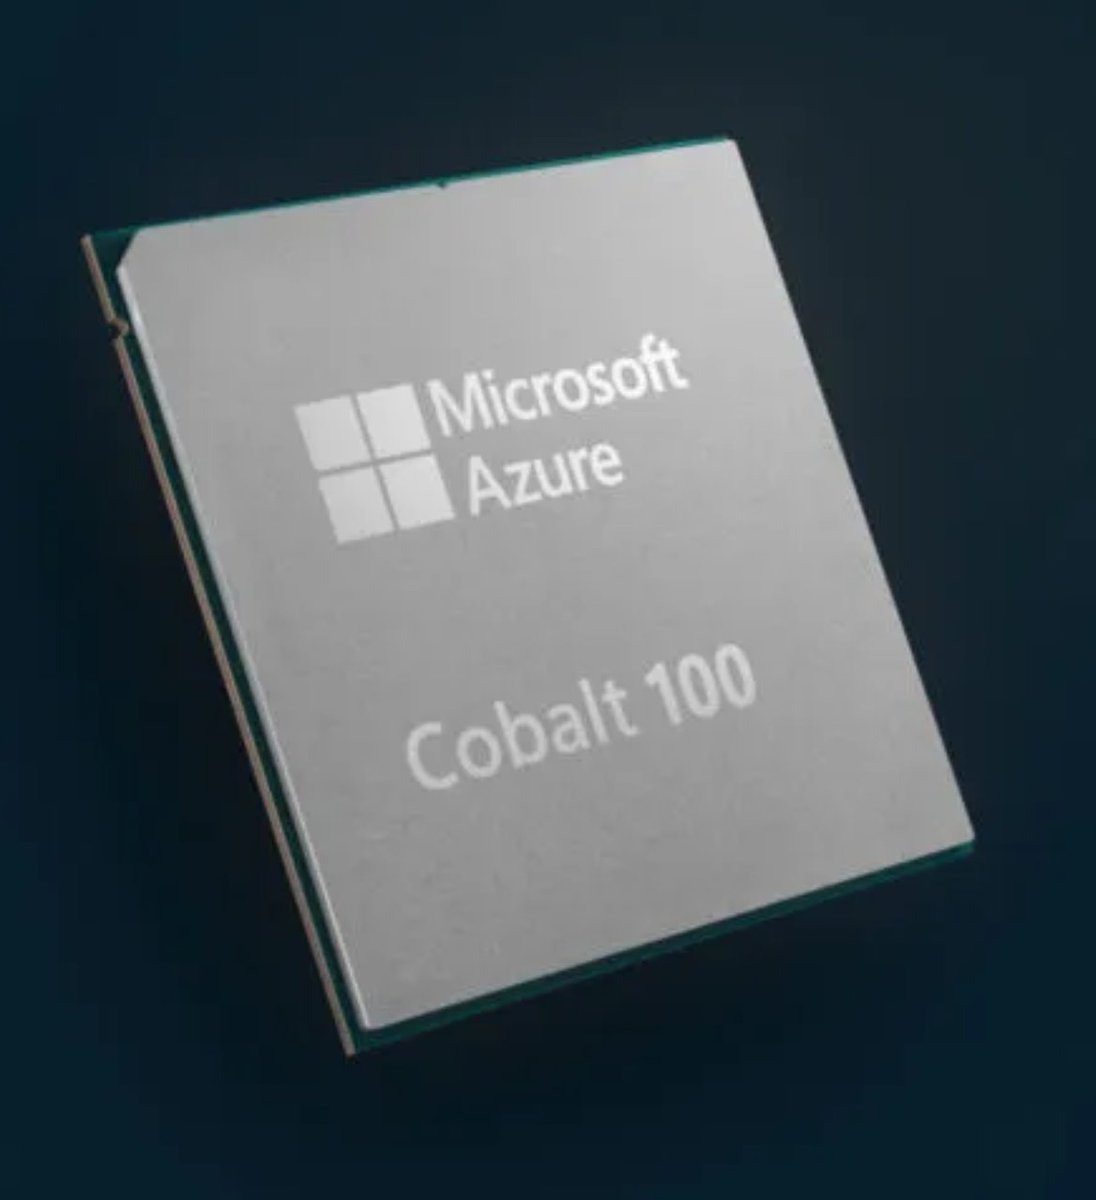 #Microsoft to launch its custom Cobalt 100 chips to customers as a public preview next week

These chips will offer 40% better performance over other ARM chips in market. Adobe, Snowflake etc. have already started using new chips

via @TechCrunch
#Cobalt100 #ARM #news #exposed